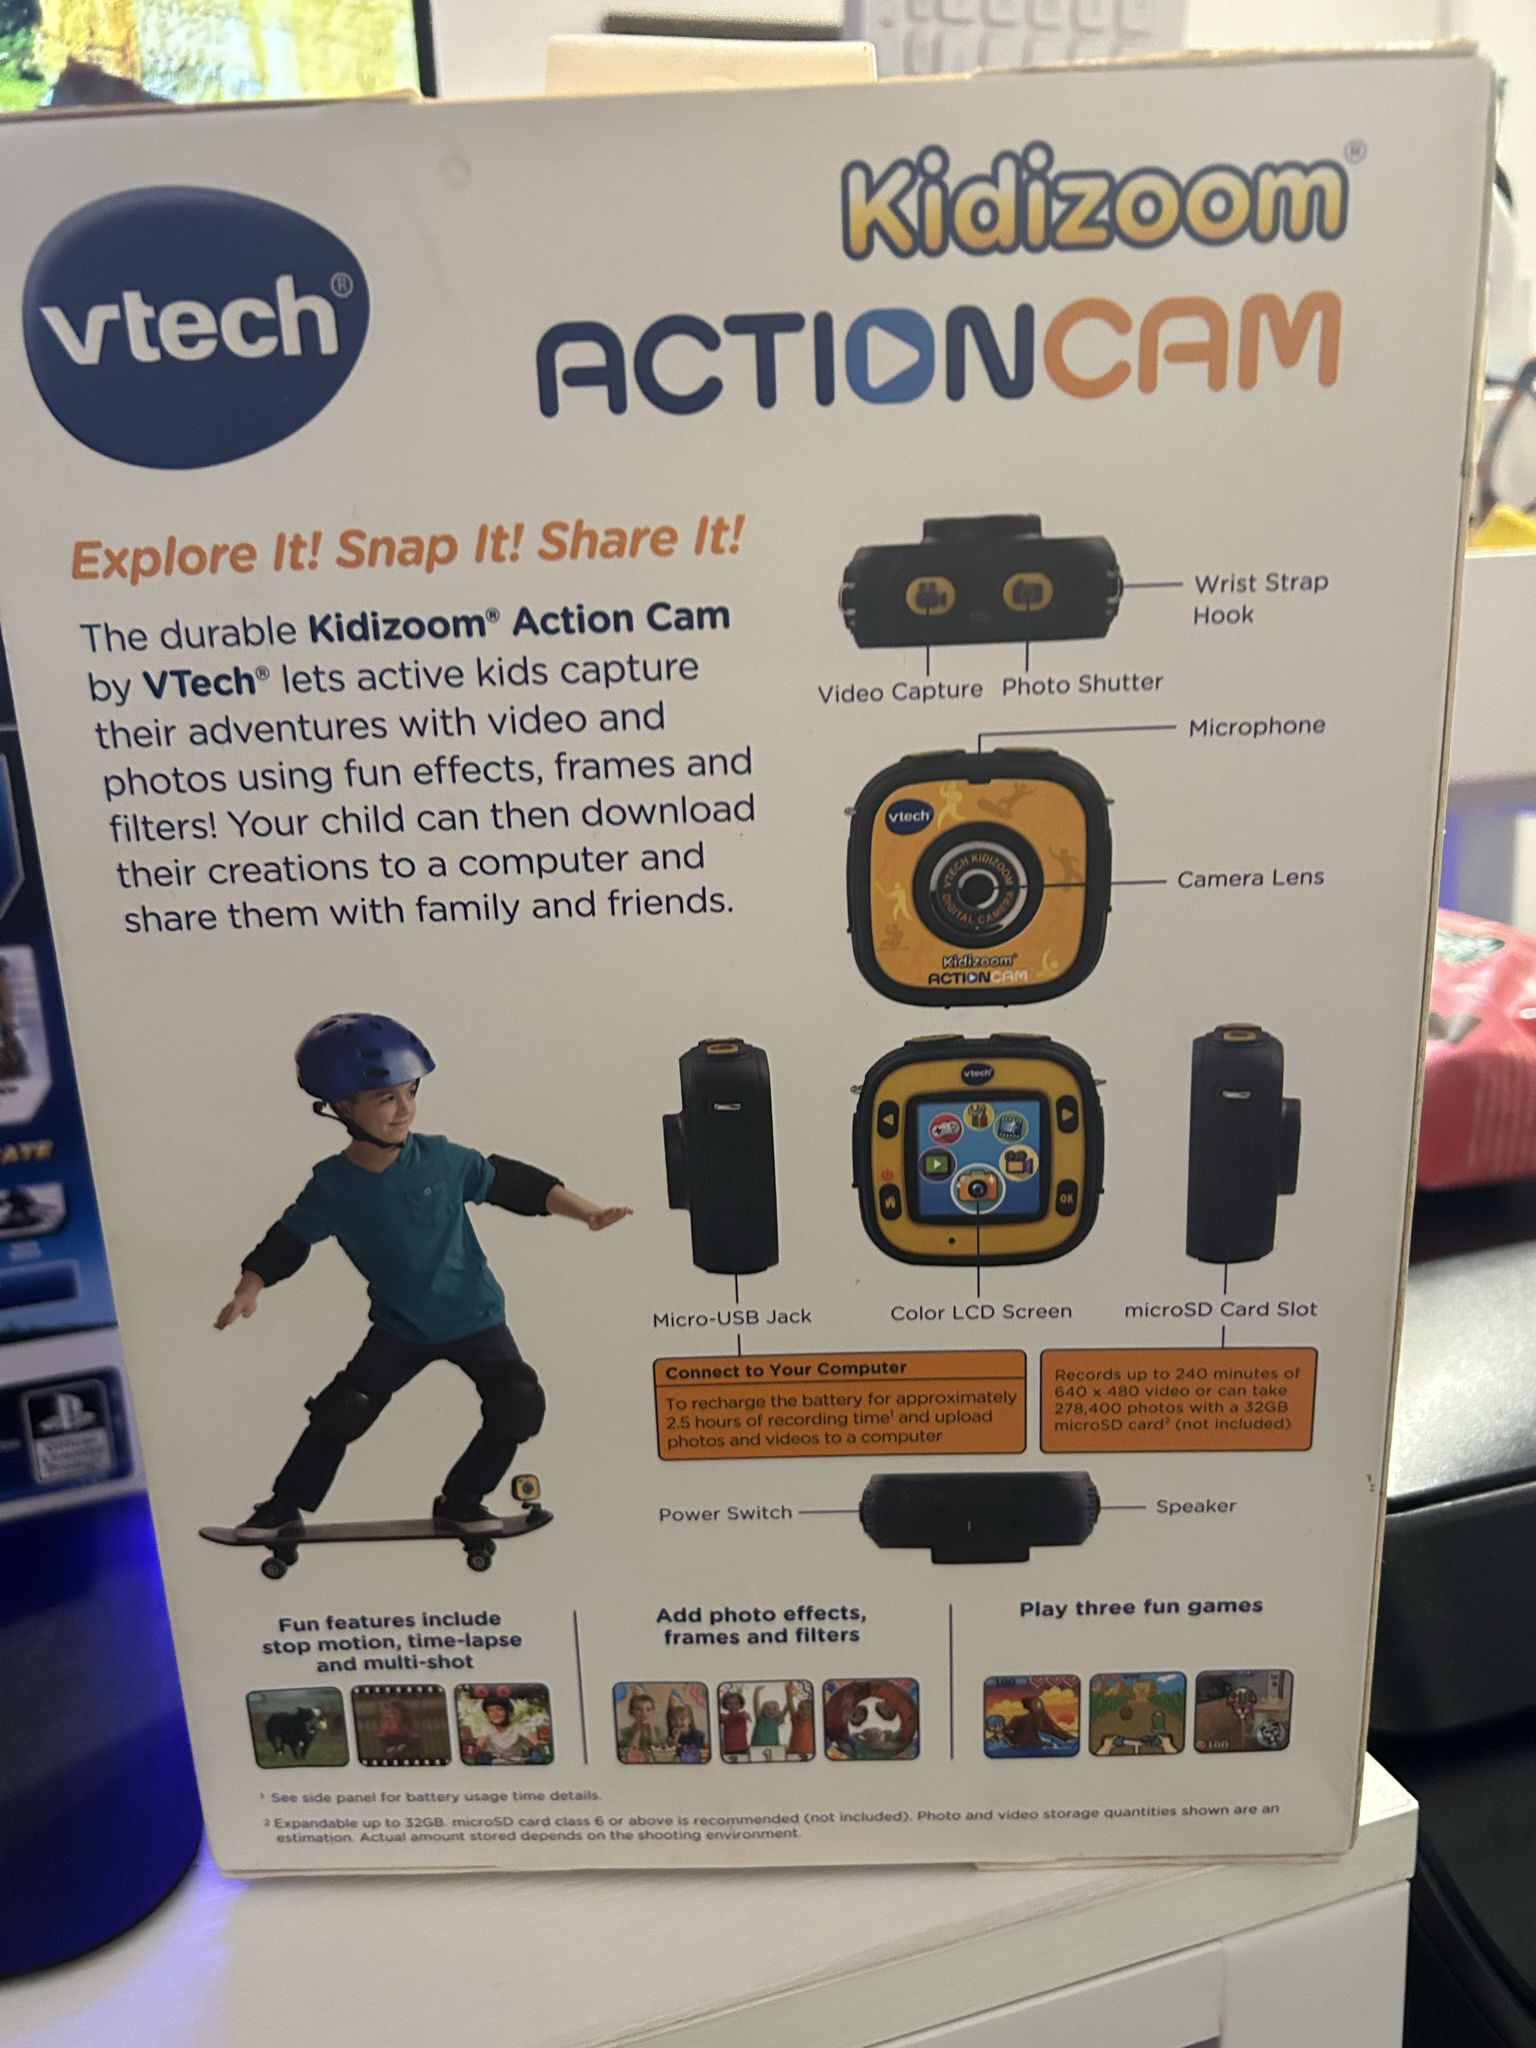 Action Cam